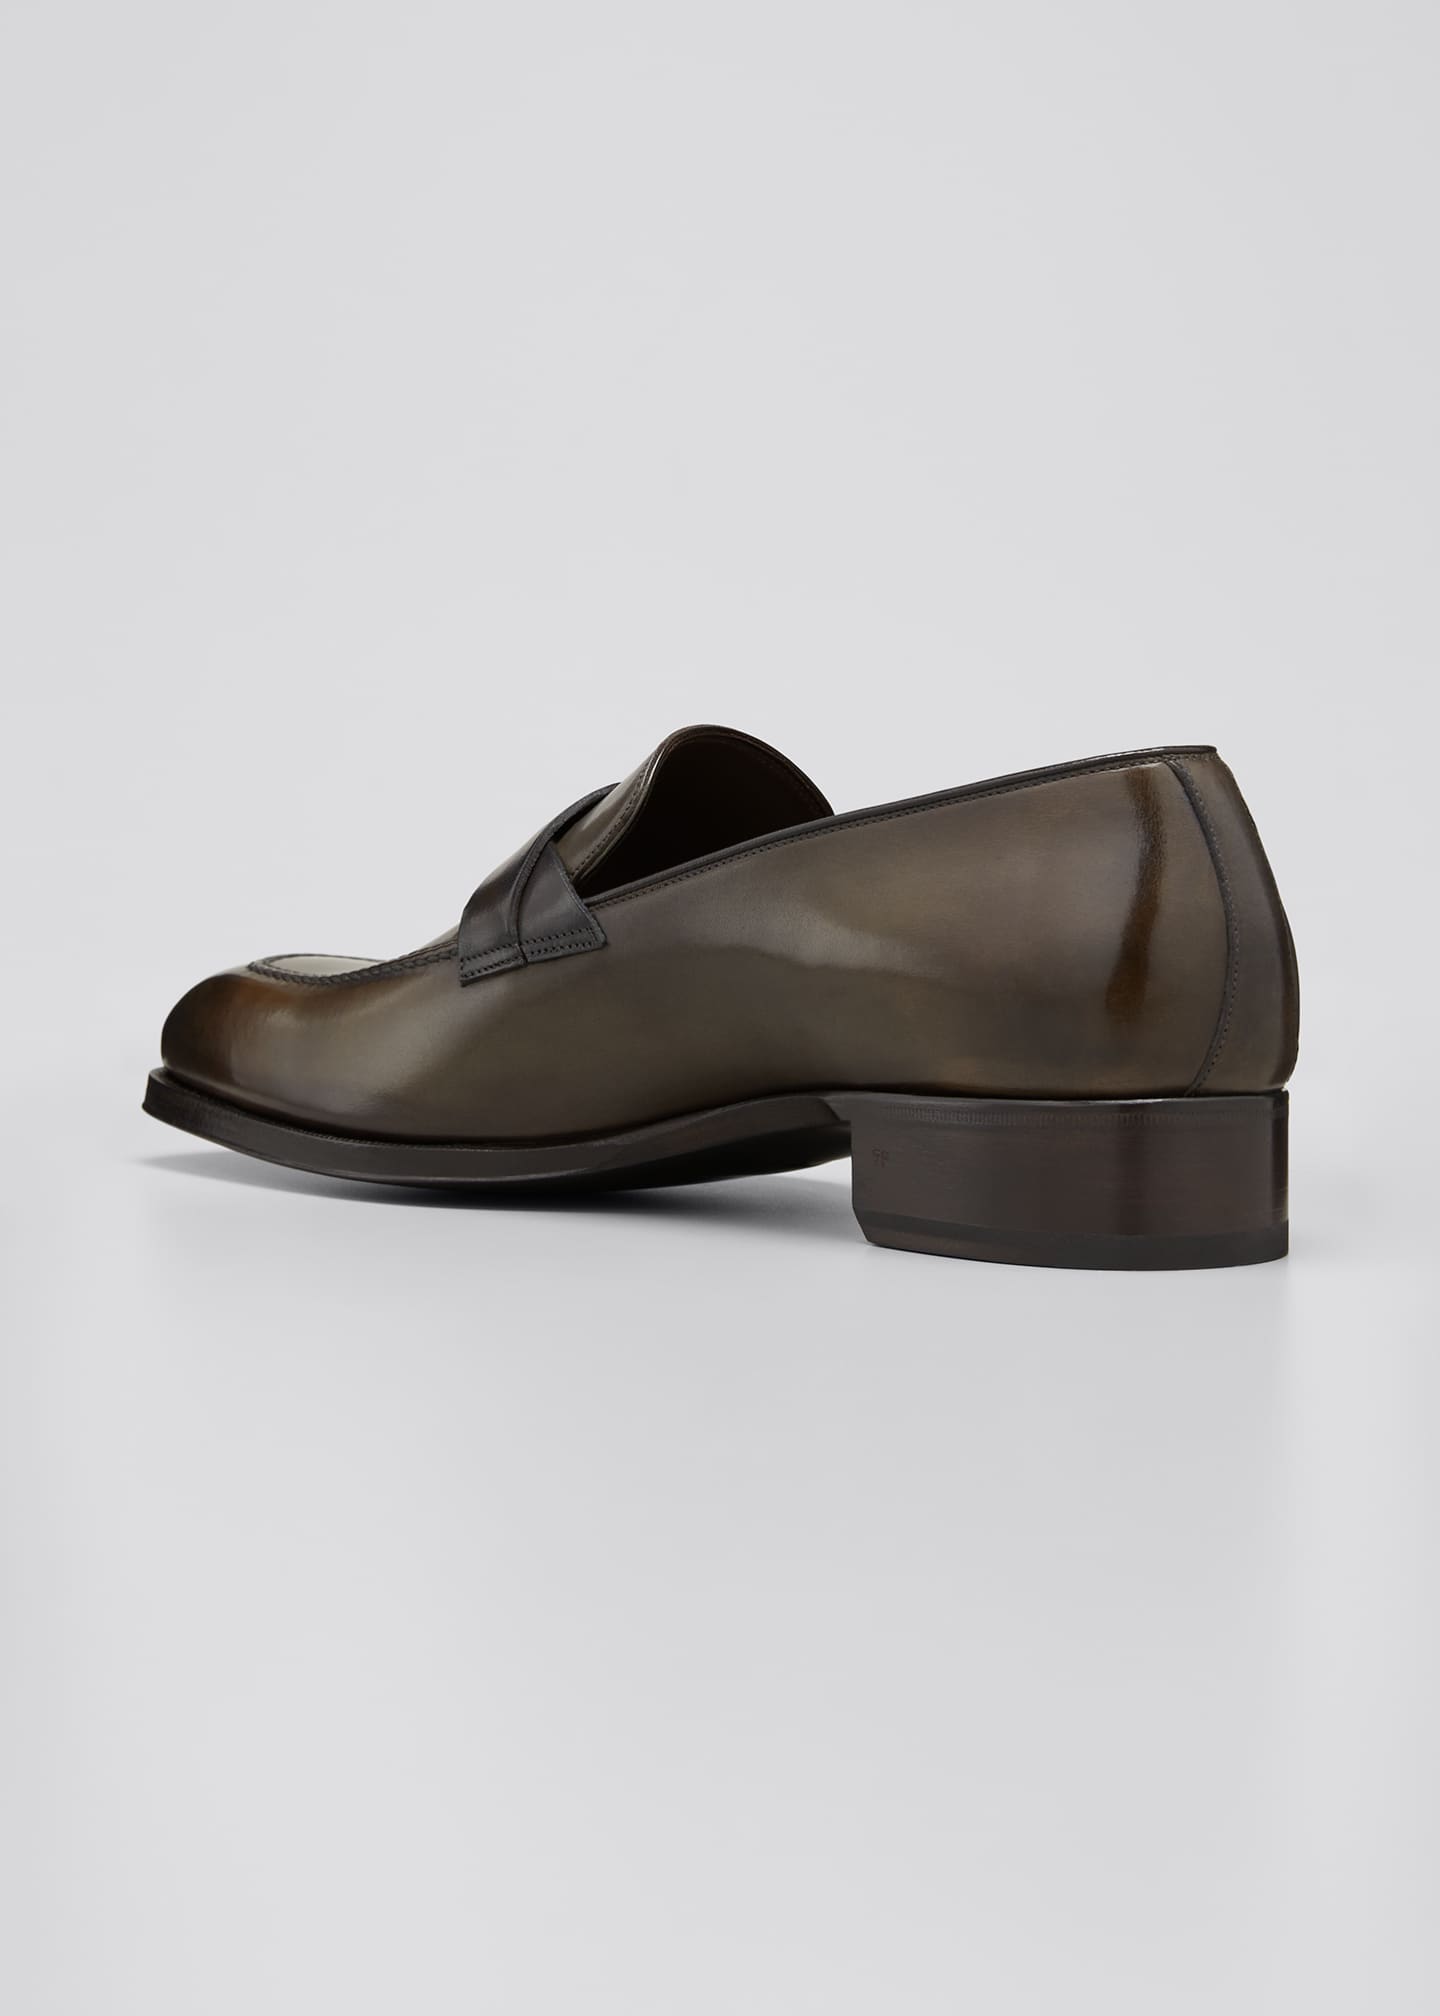 TOM FORD Men's Elkan Twisted-Keeper Leather Loafers - Bergdorf Goodman